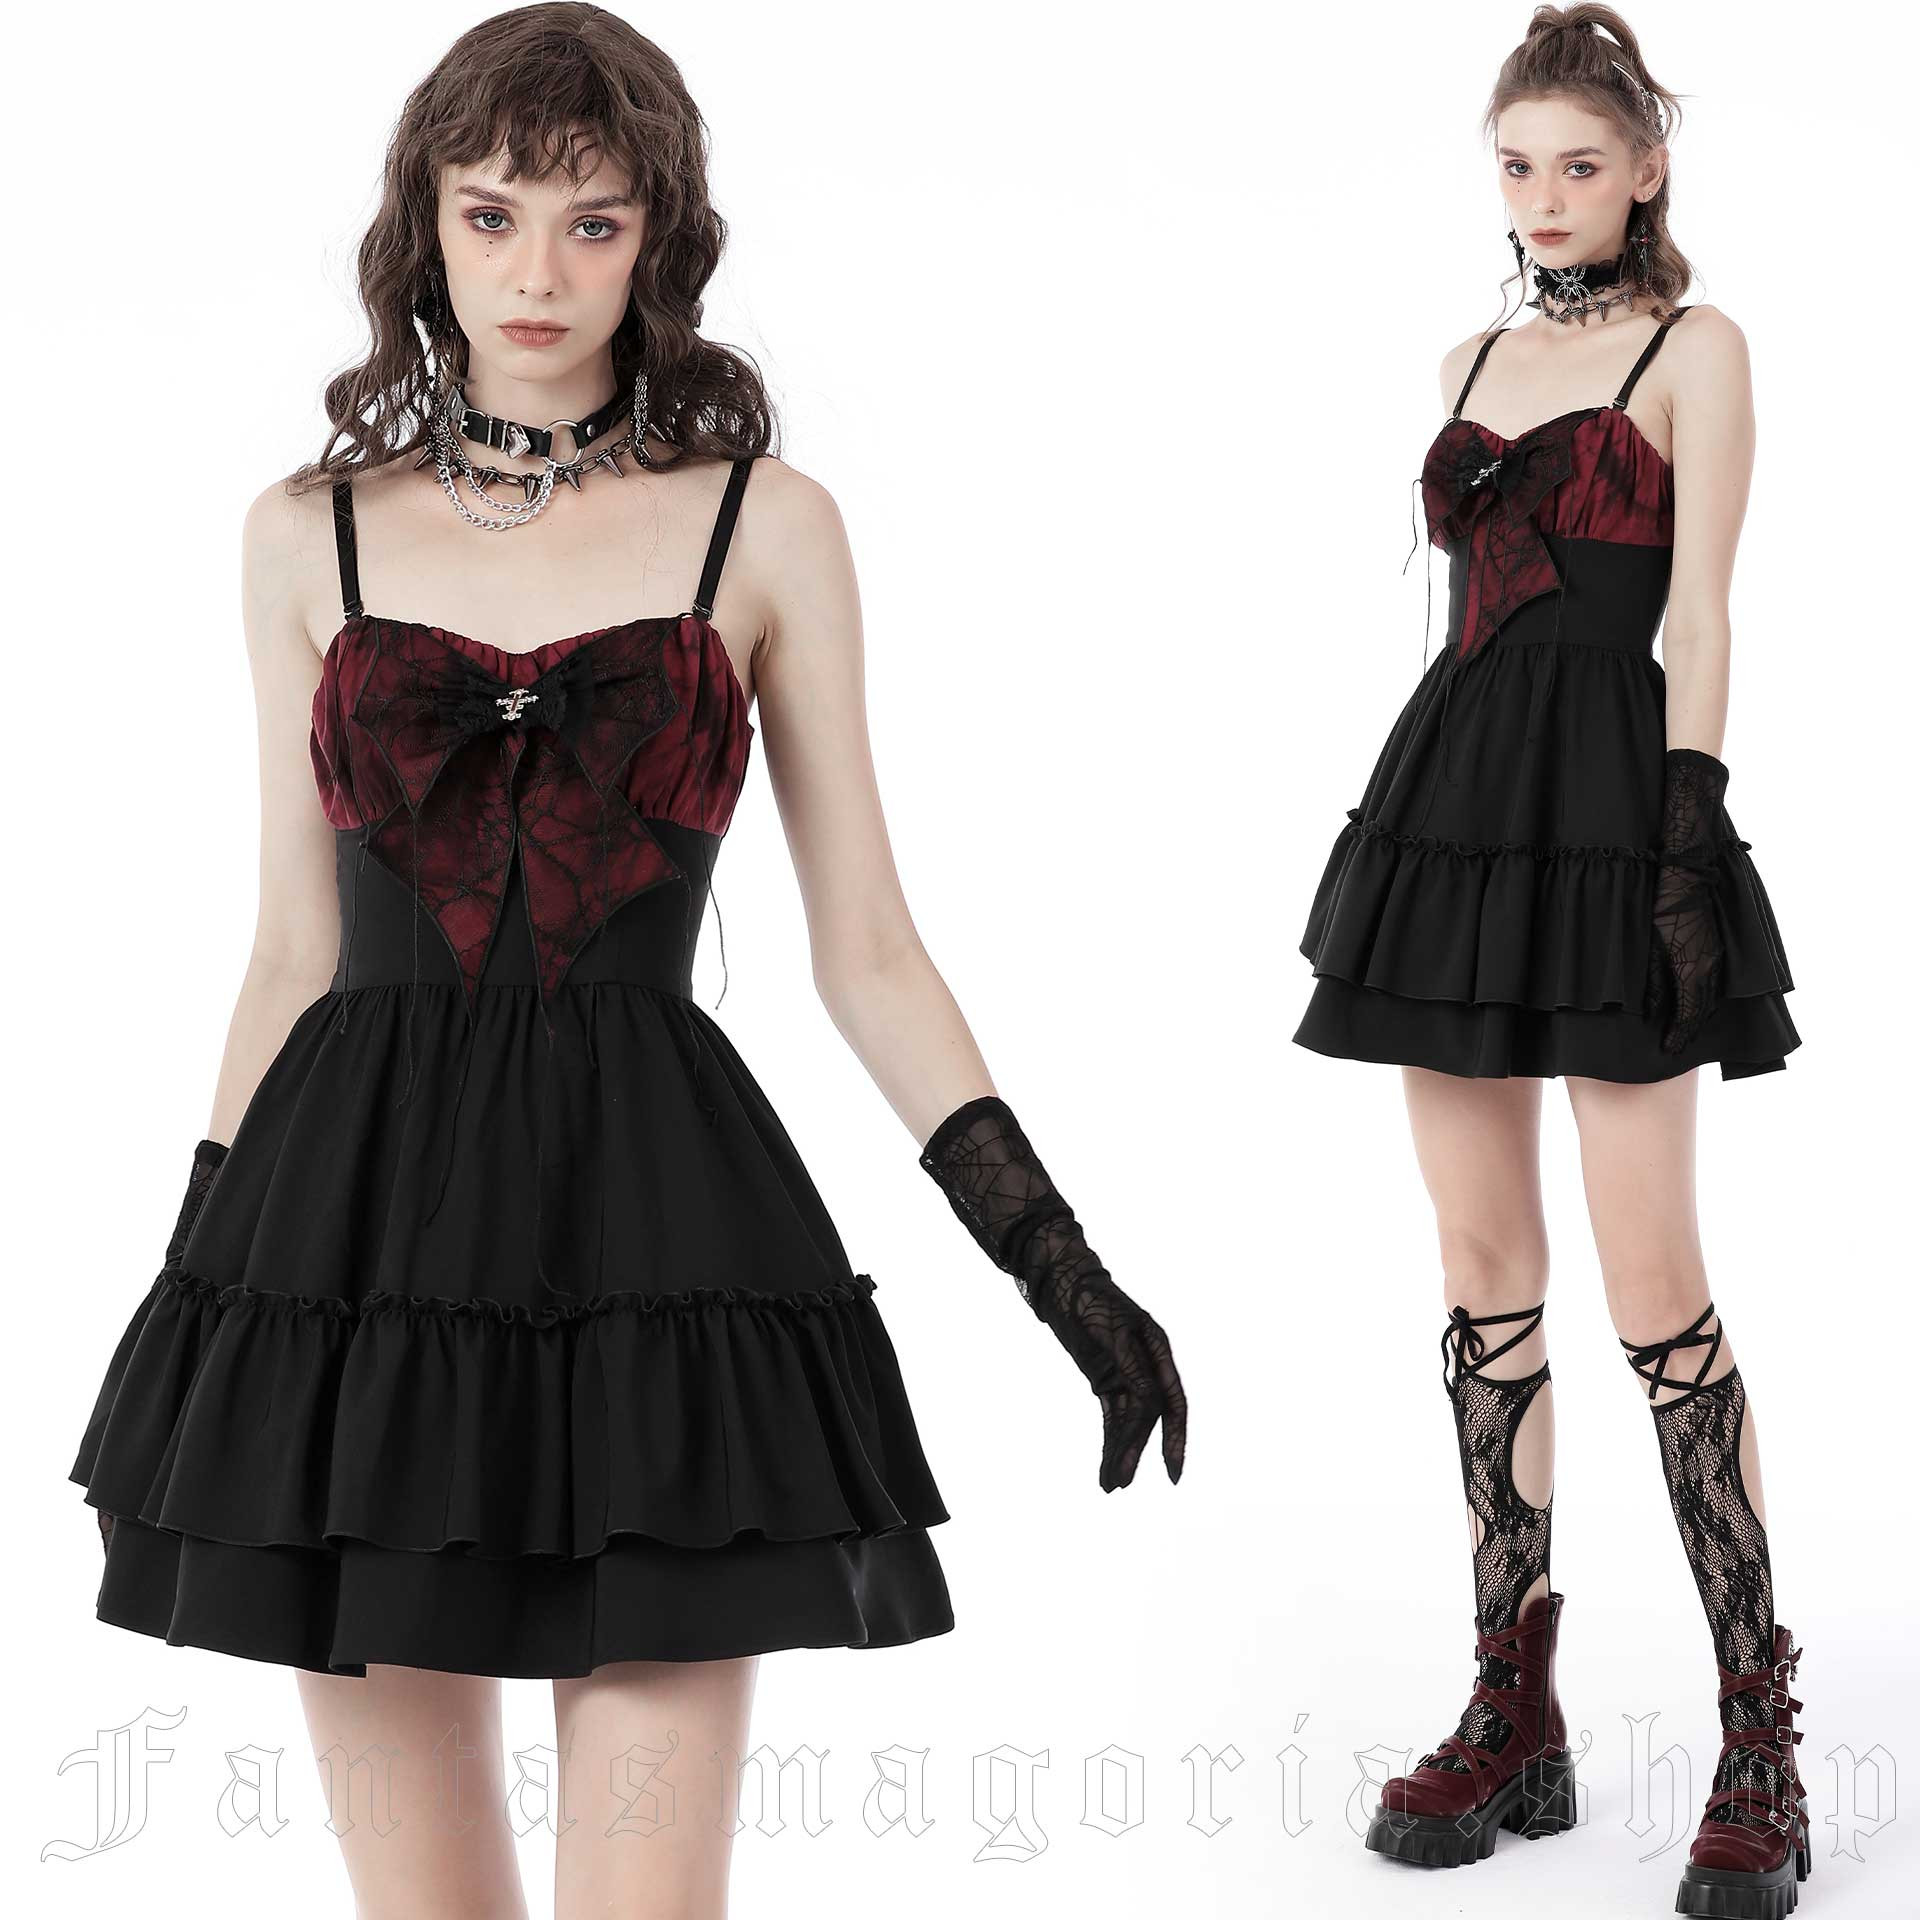 Sheer Black Lace Gothic Skater Dress With Sleeves Vampire Nu Goth